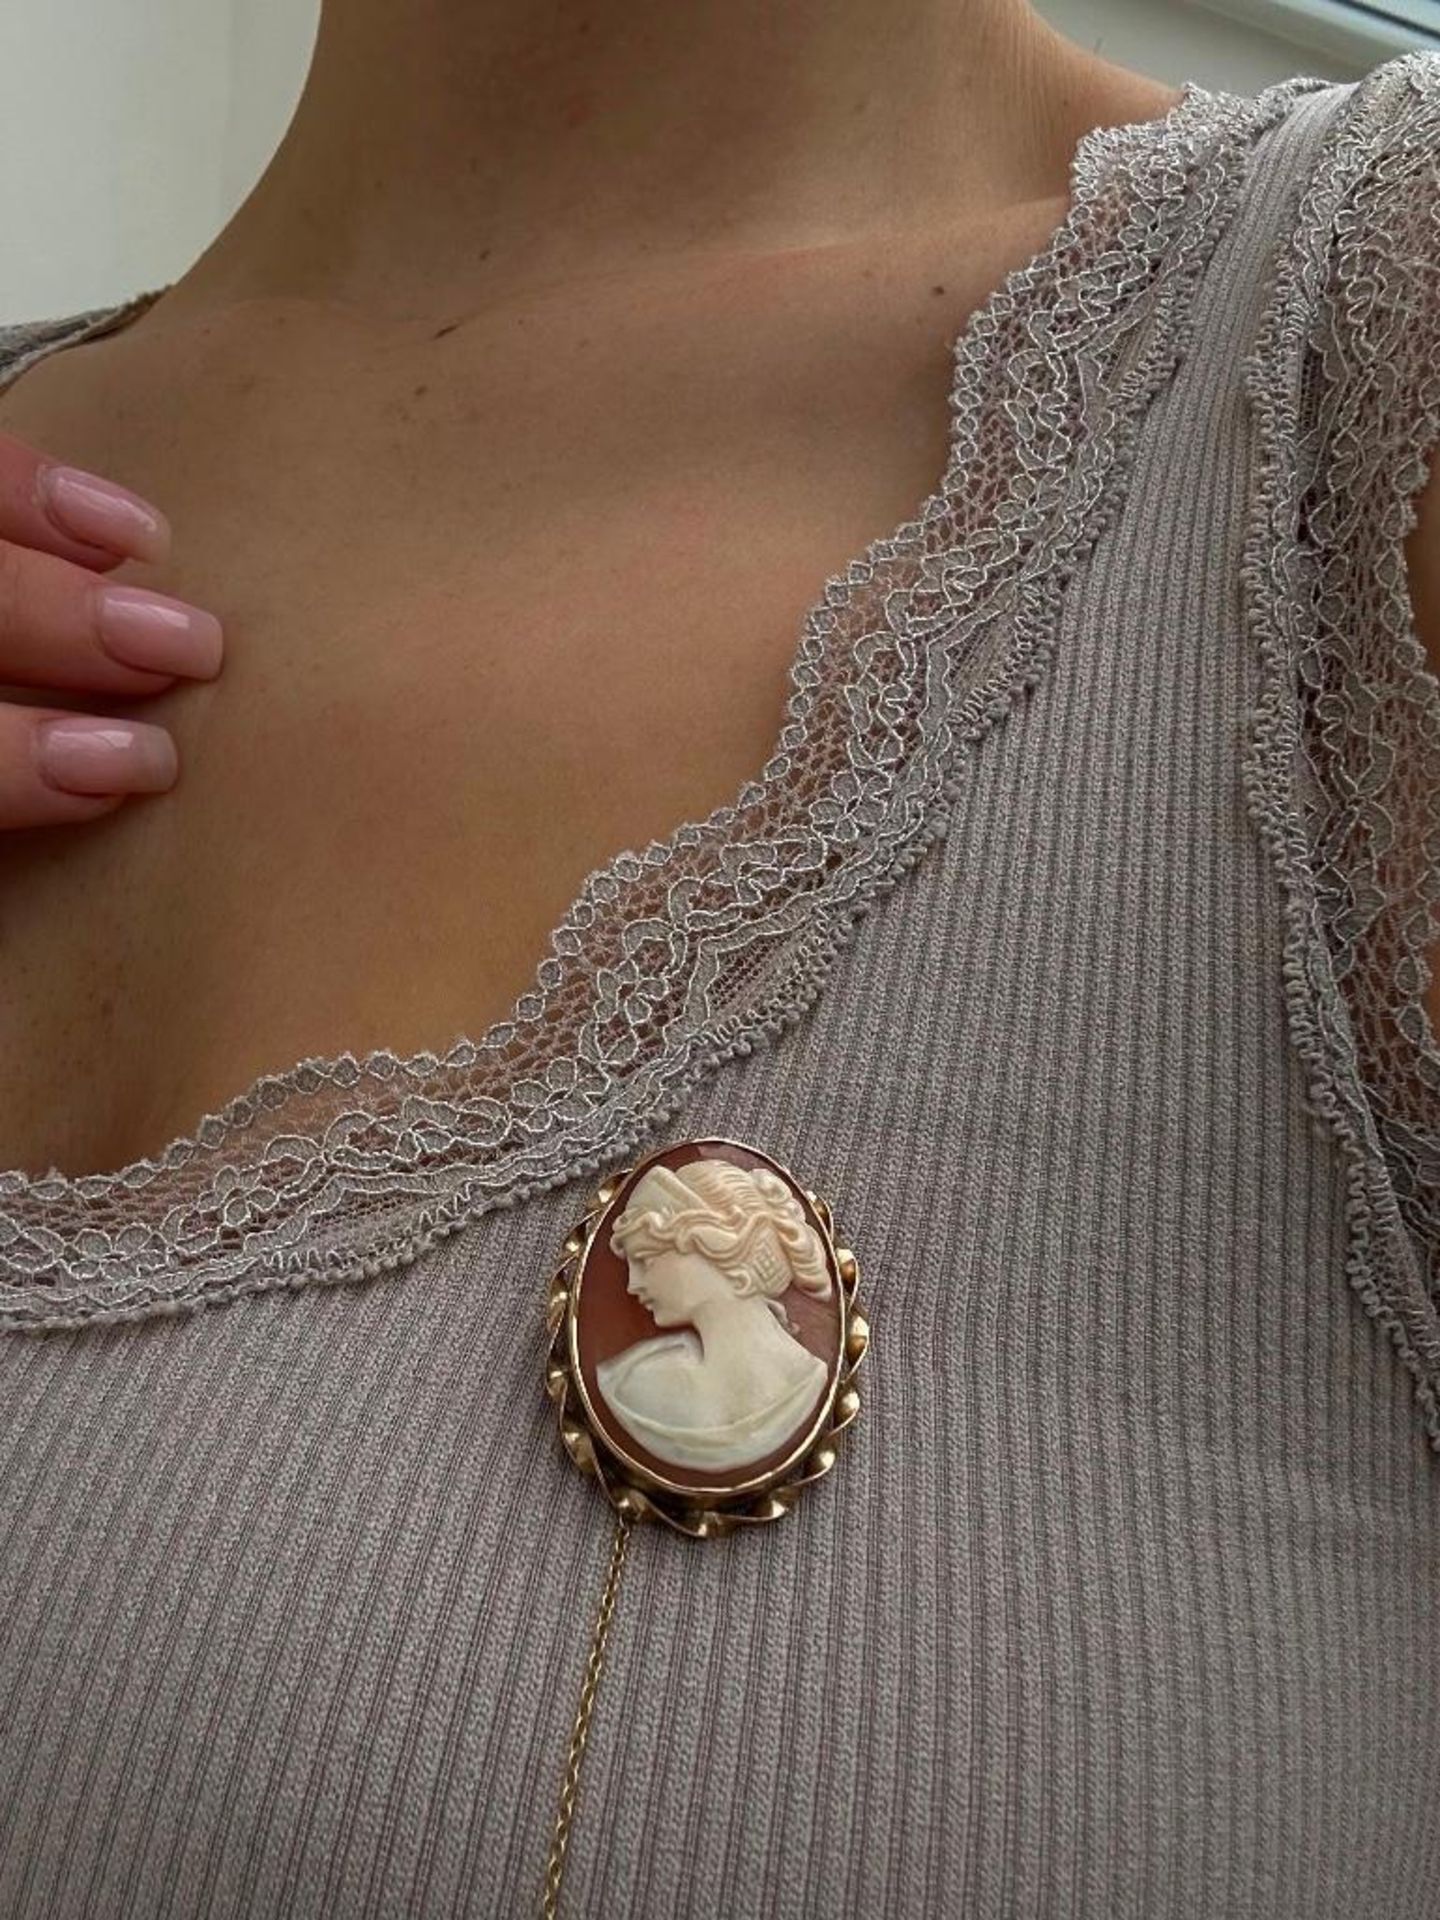 Gold Cameo Brooch - Image 2 of 4